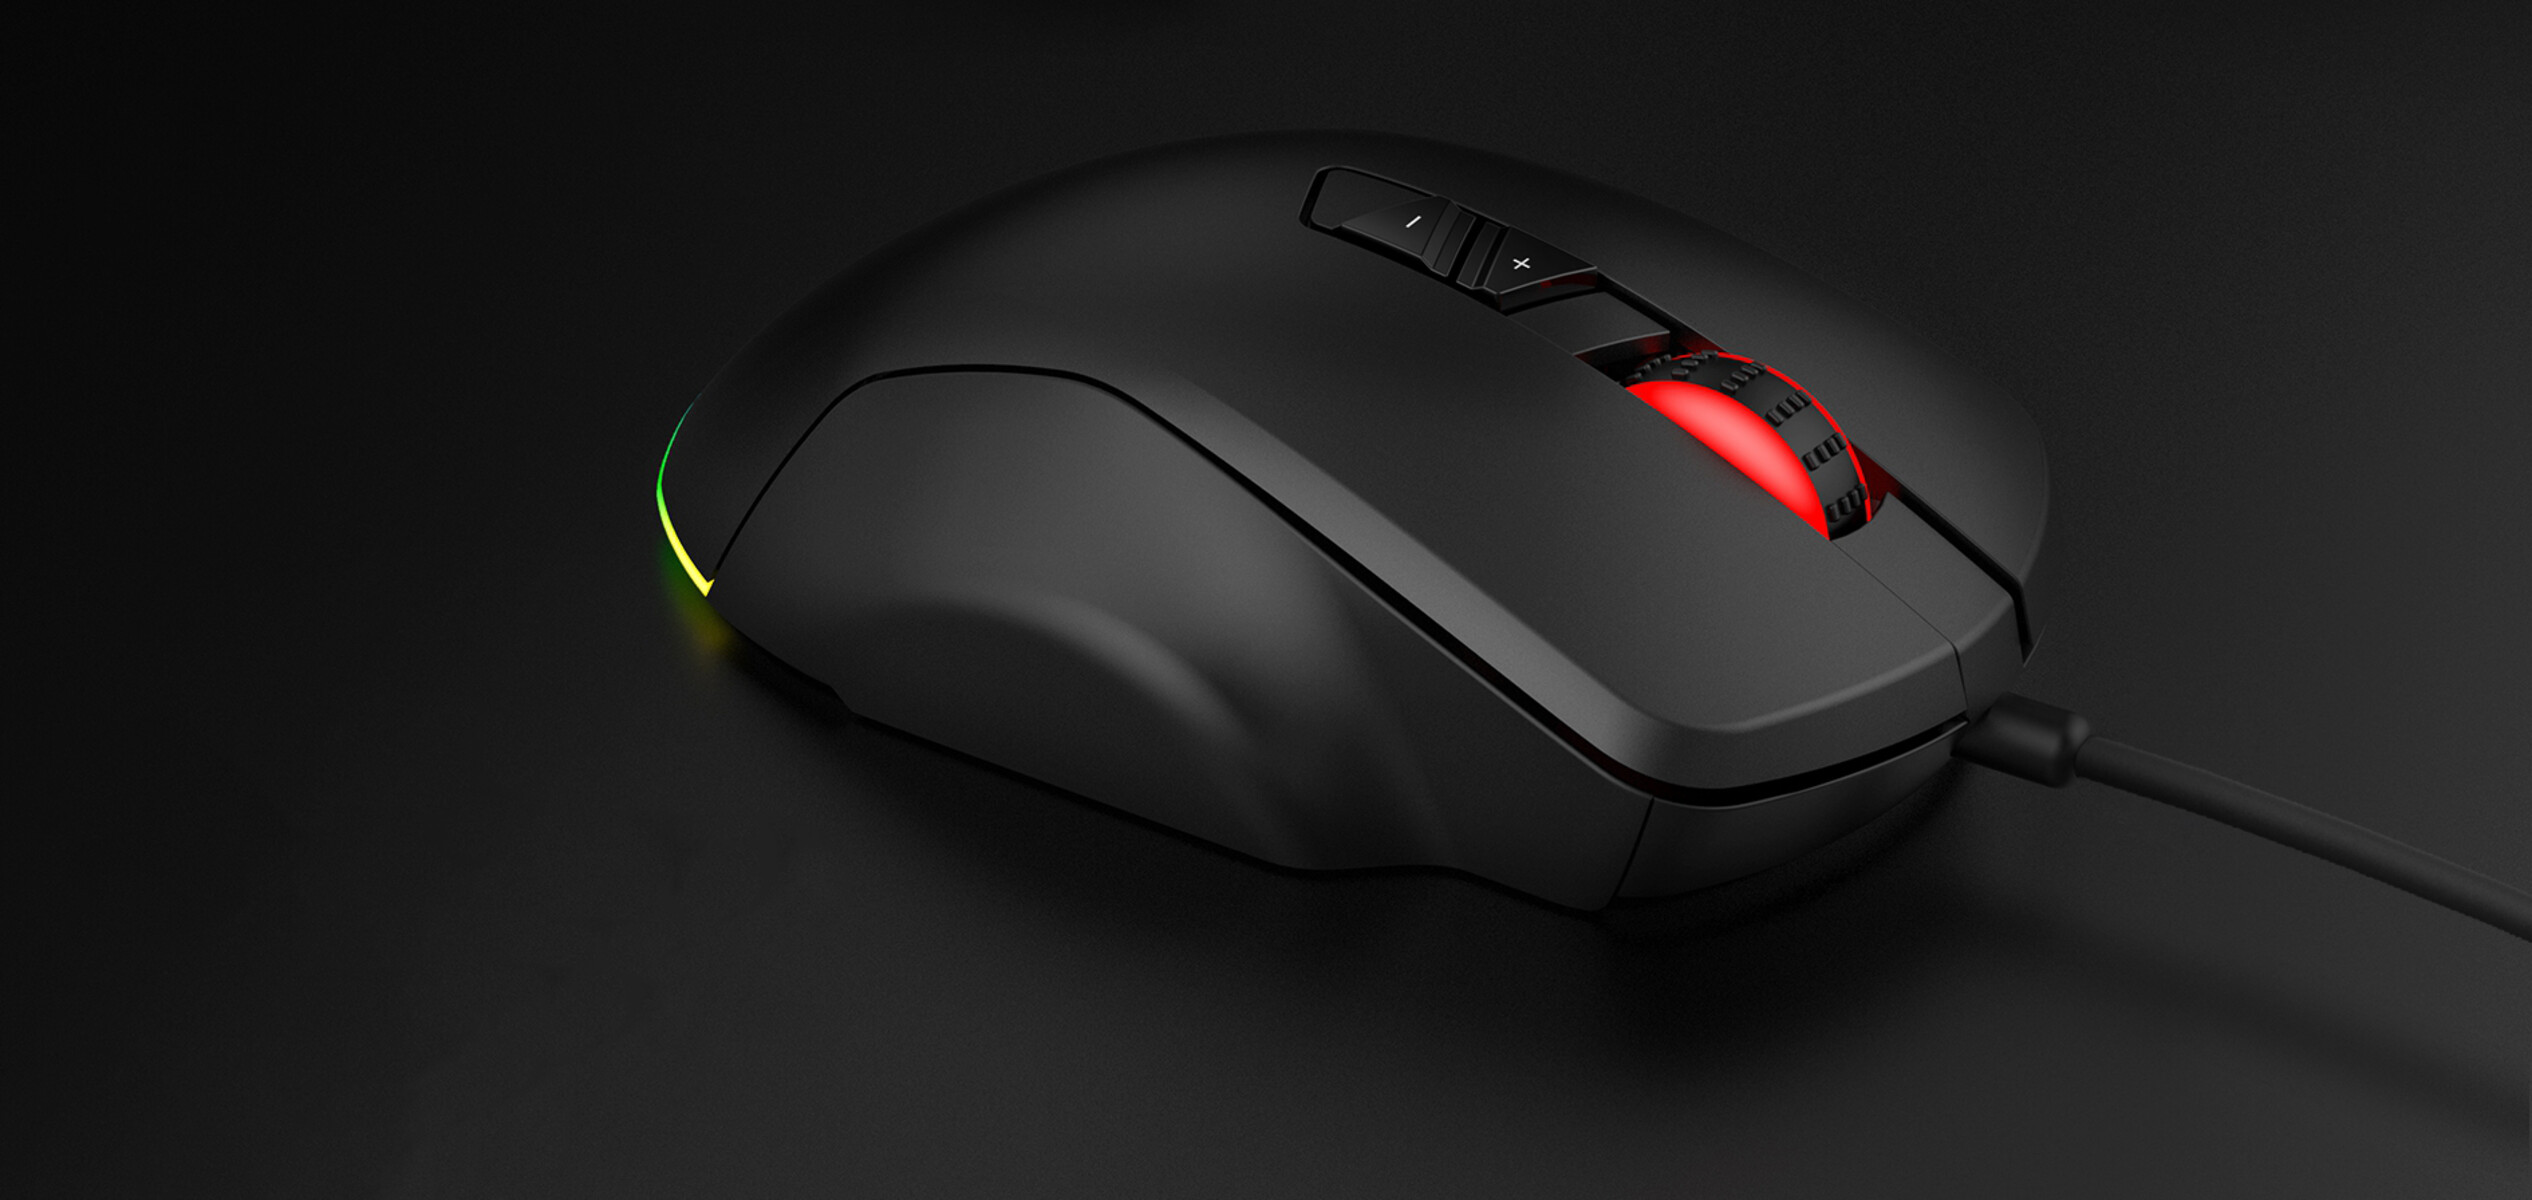 How To Download Programmable Software For Havit MS900 Gaming Mouse